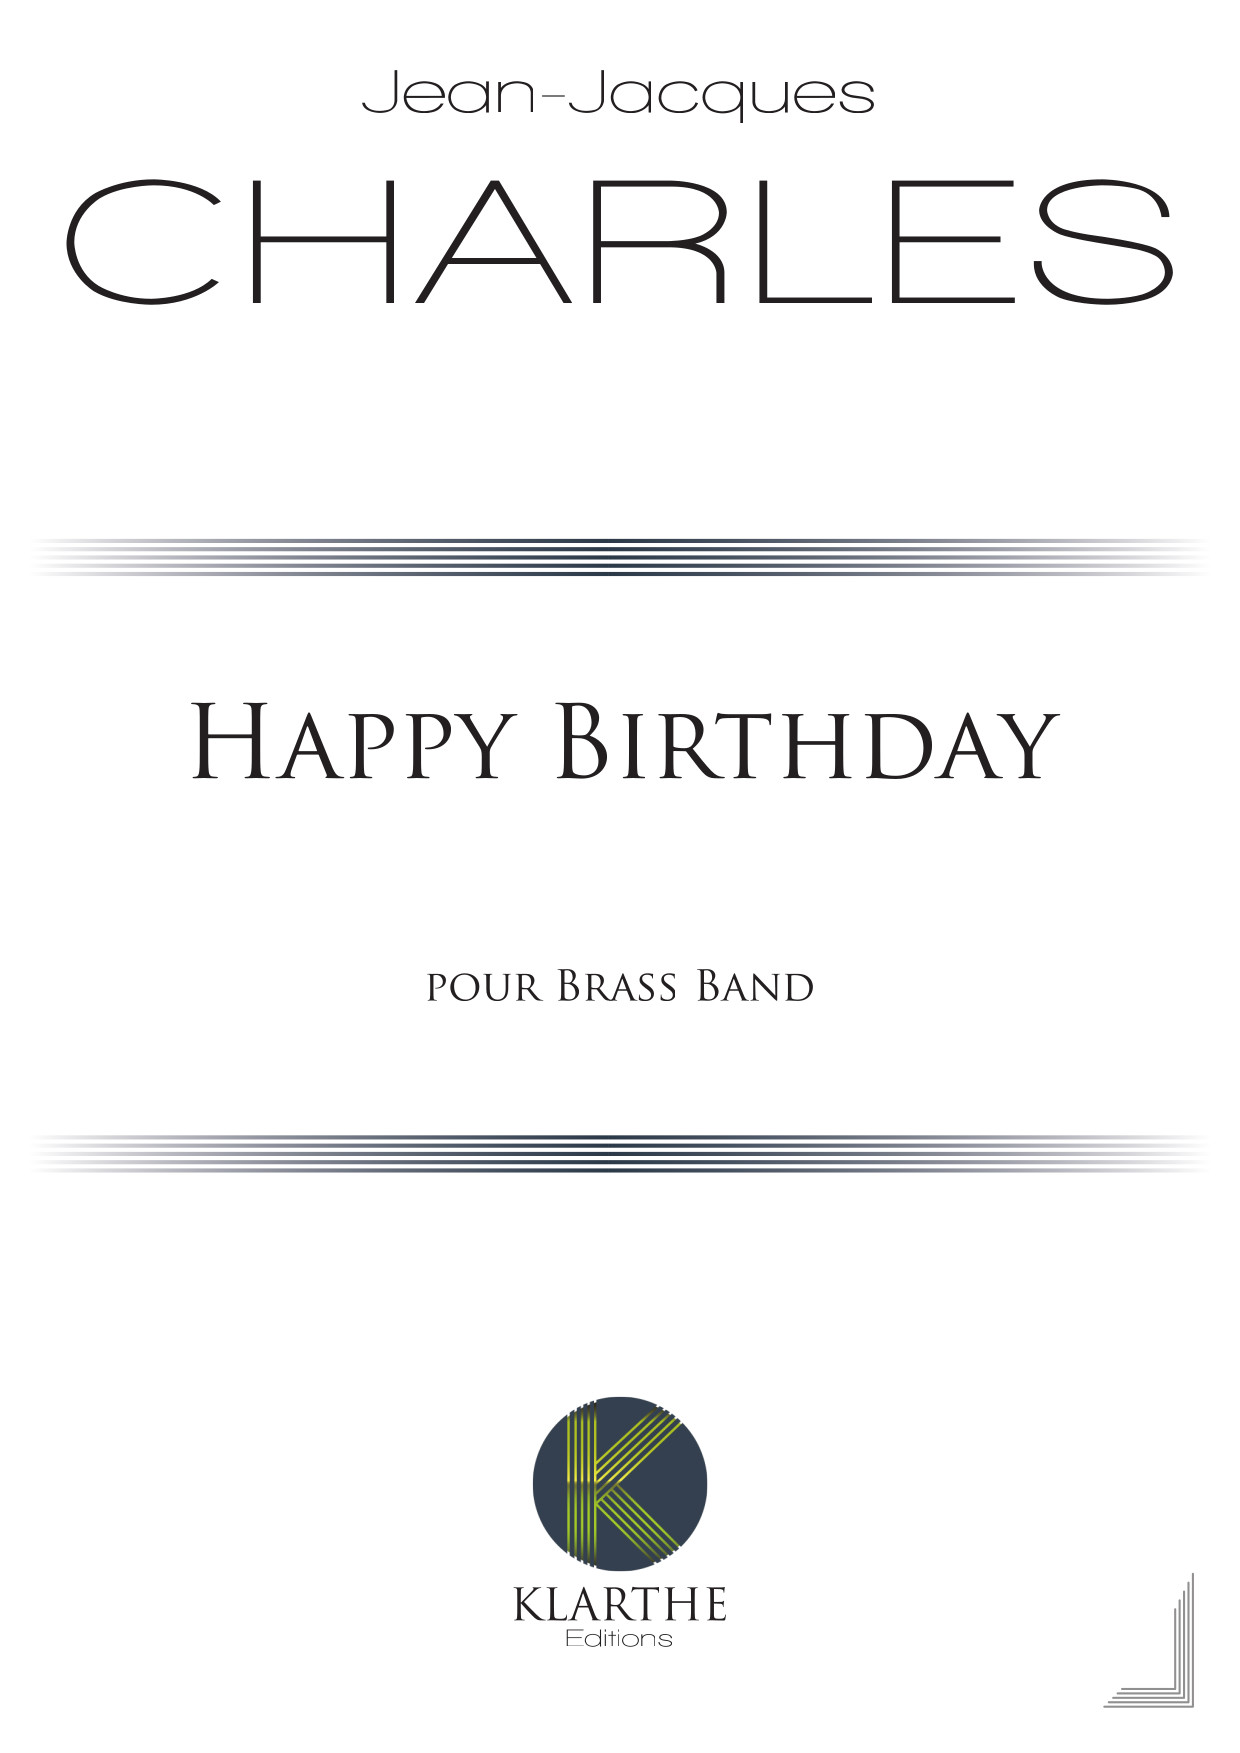 Happy Birthday (CHARLES JEAN-JACQUES)